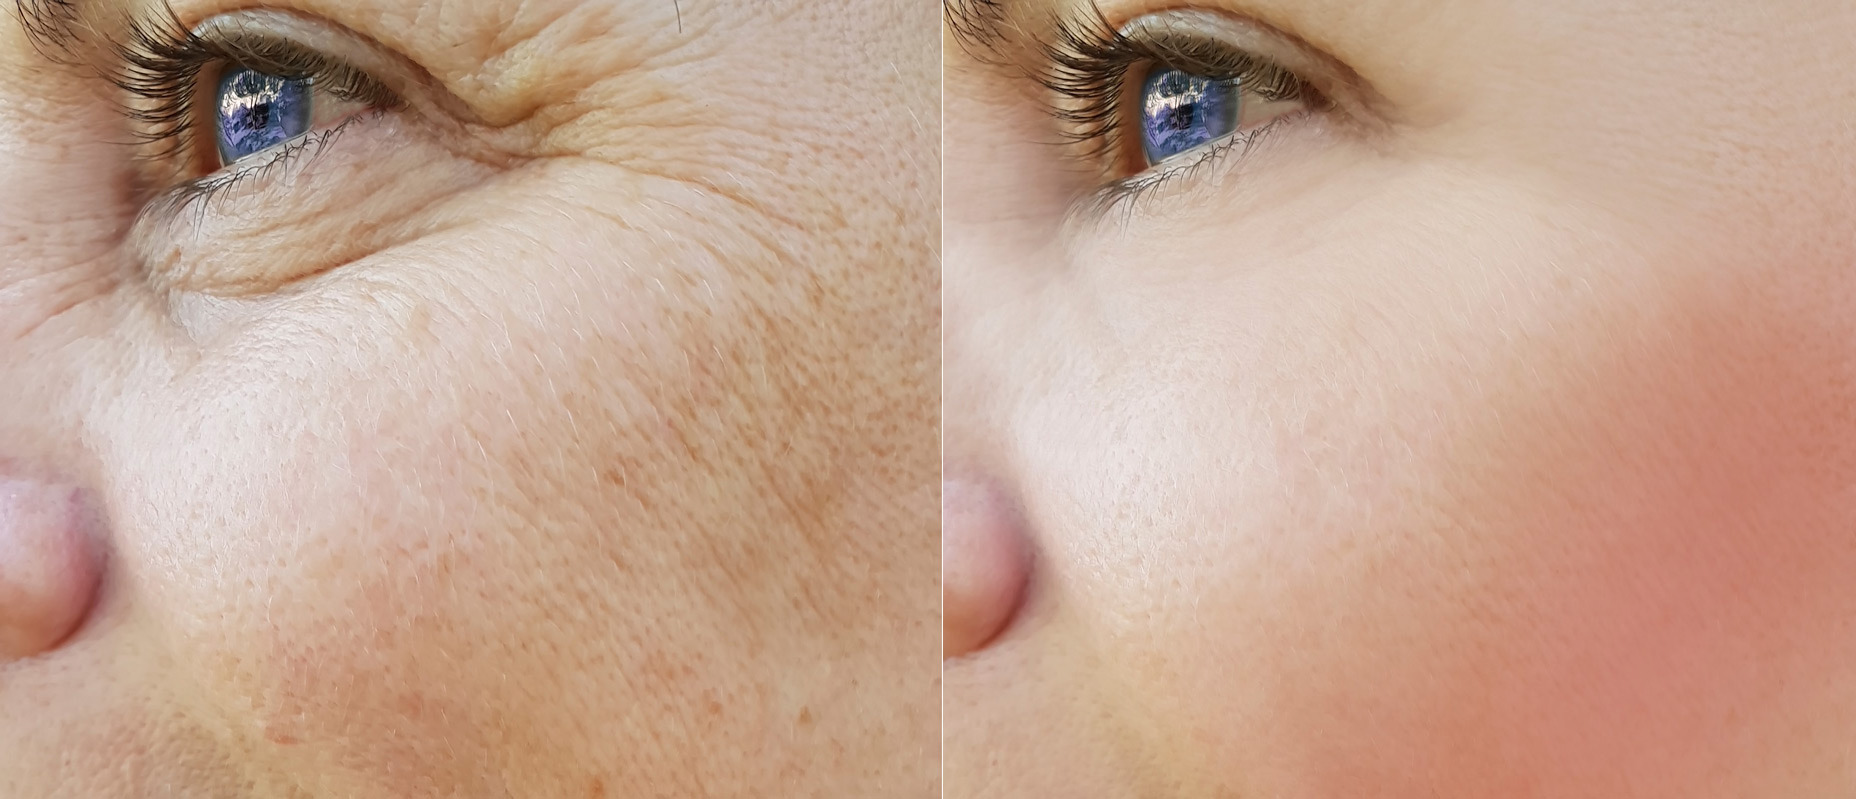 IPL Skin Brightening Lasers Before and After Photo by Torrey Pines Dermatology & Laser Center in La Jolla, CA